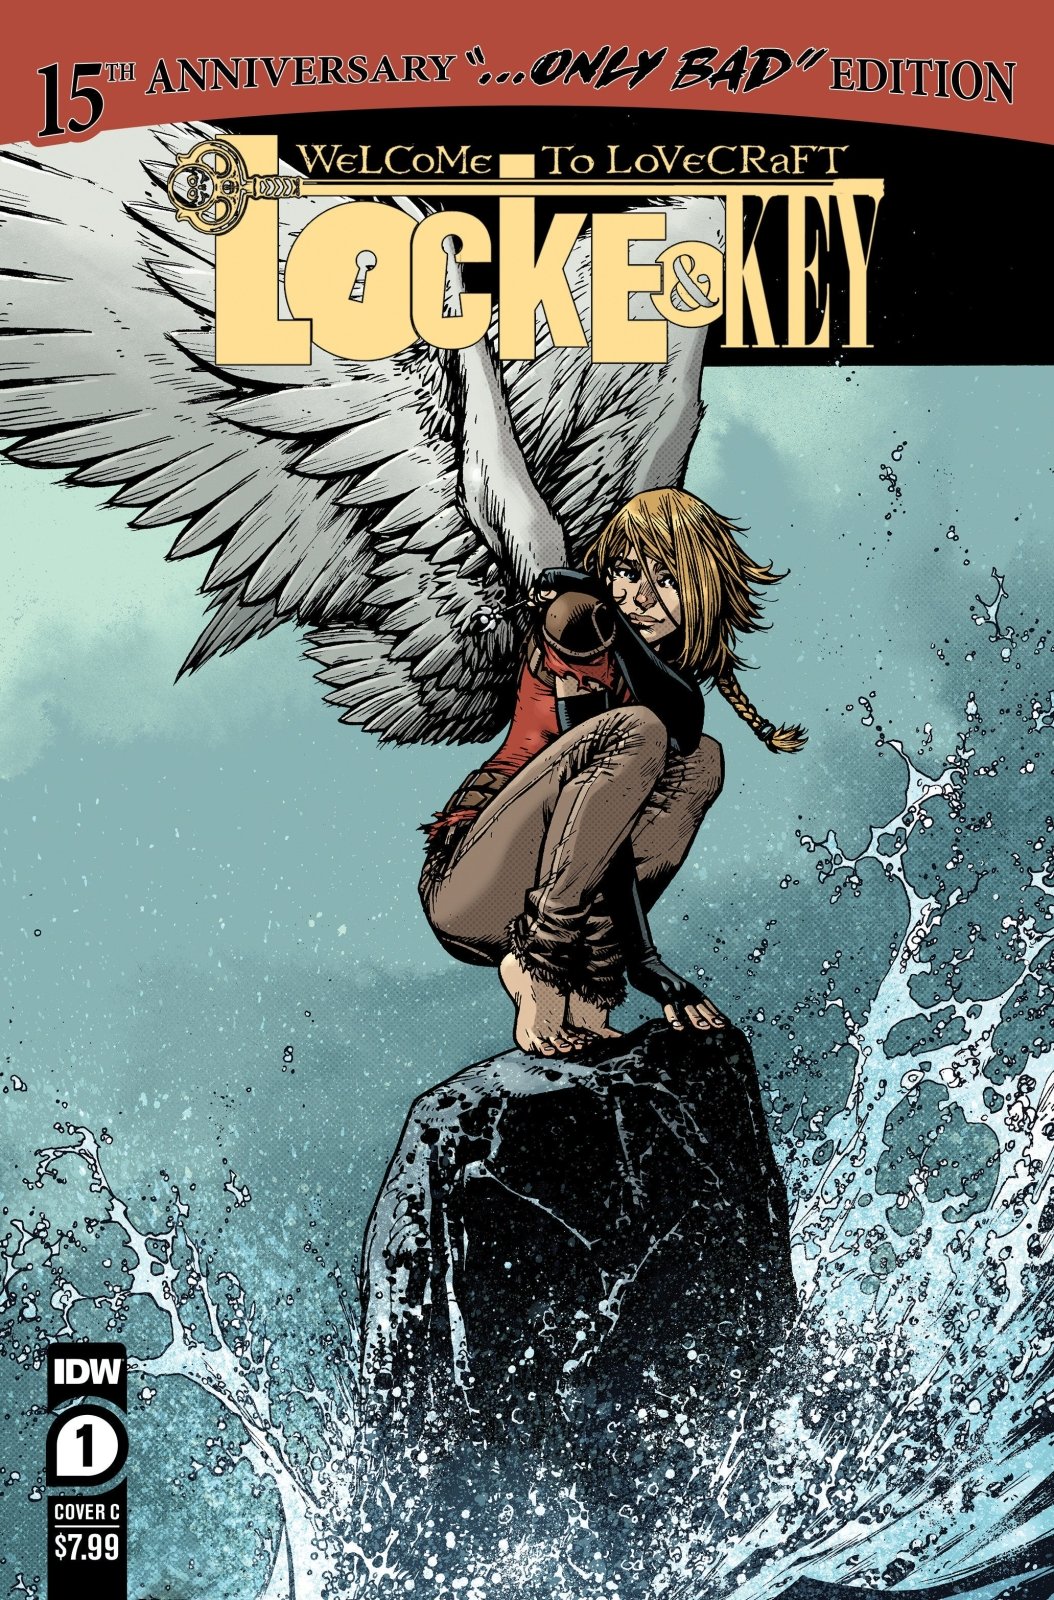 Locke & Key: Welcome To Lovecraft #1--15th Anniversary Edition Variant C (Howard) - The Fourth Place